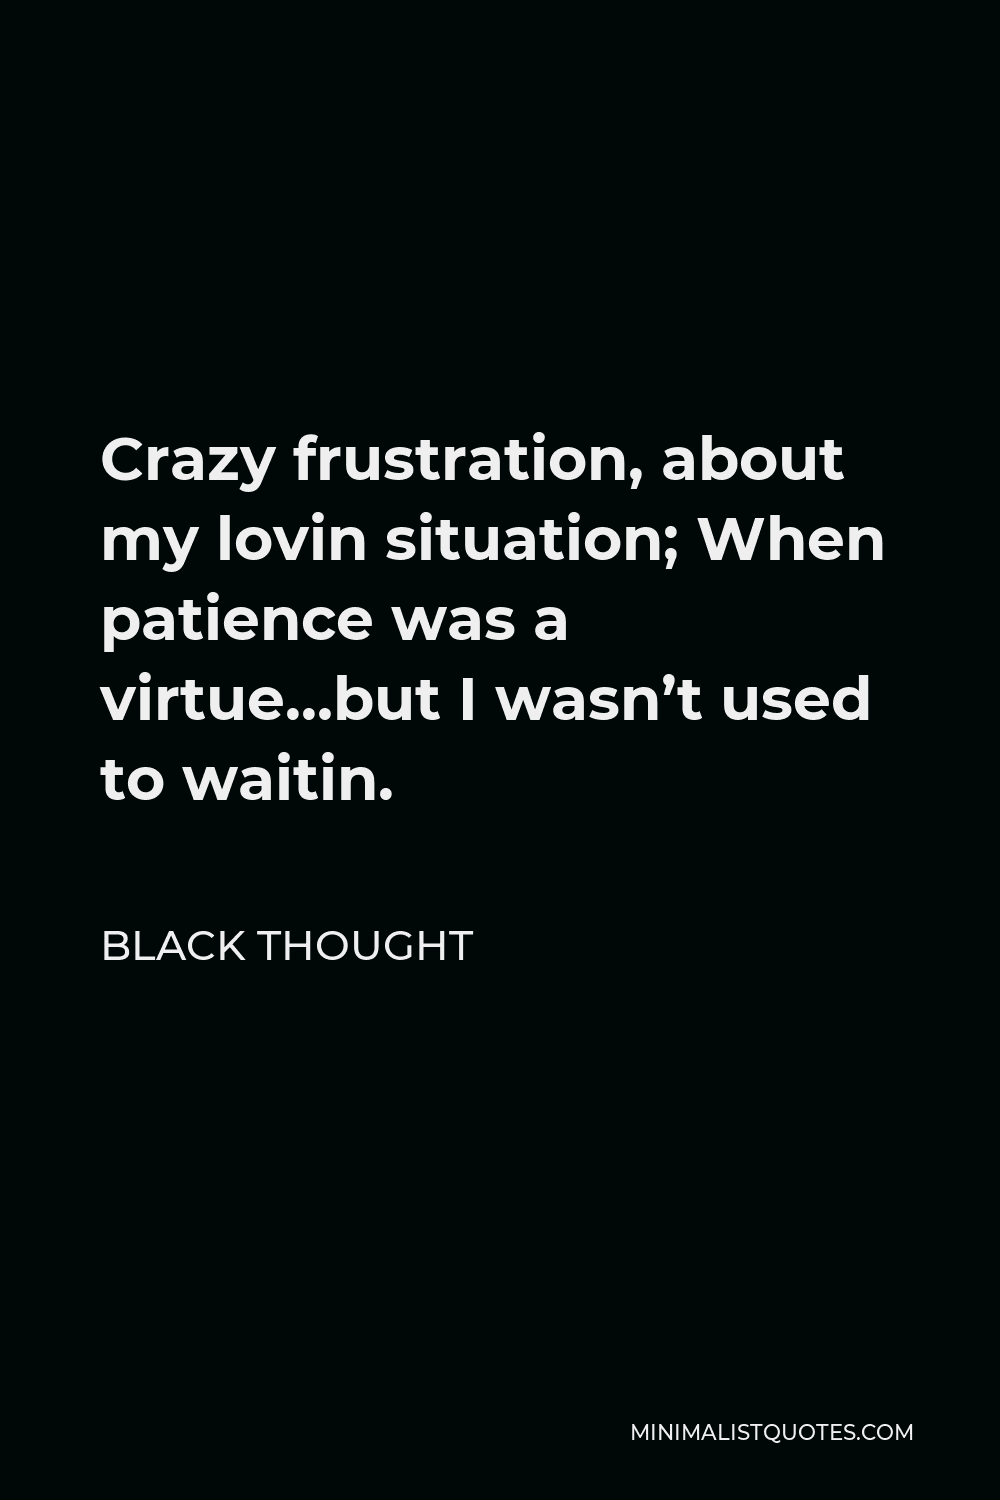 Black Thought Quote - Crazy frustration, about my lovin situation; When patience was a virtue…but I wasn’t used to waitin.